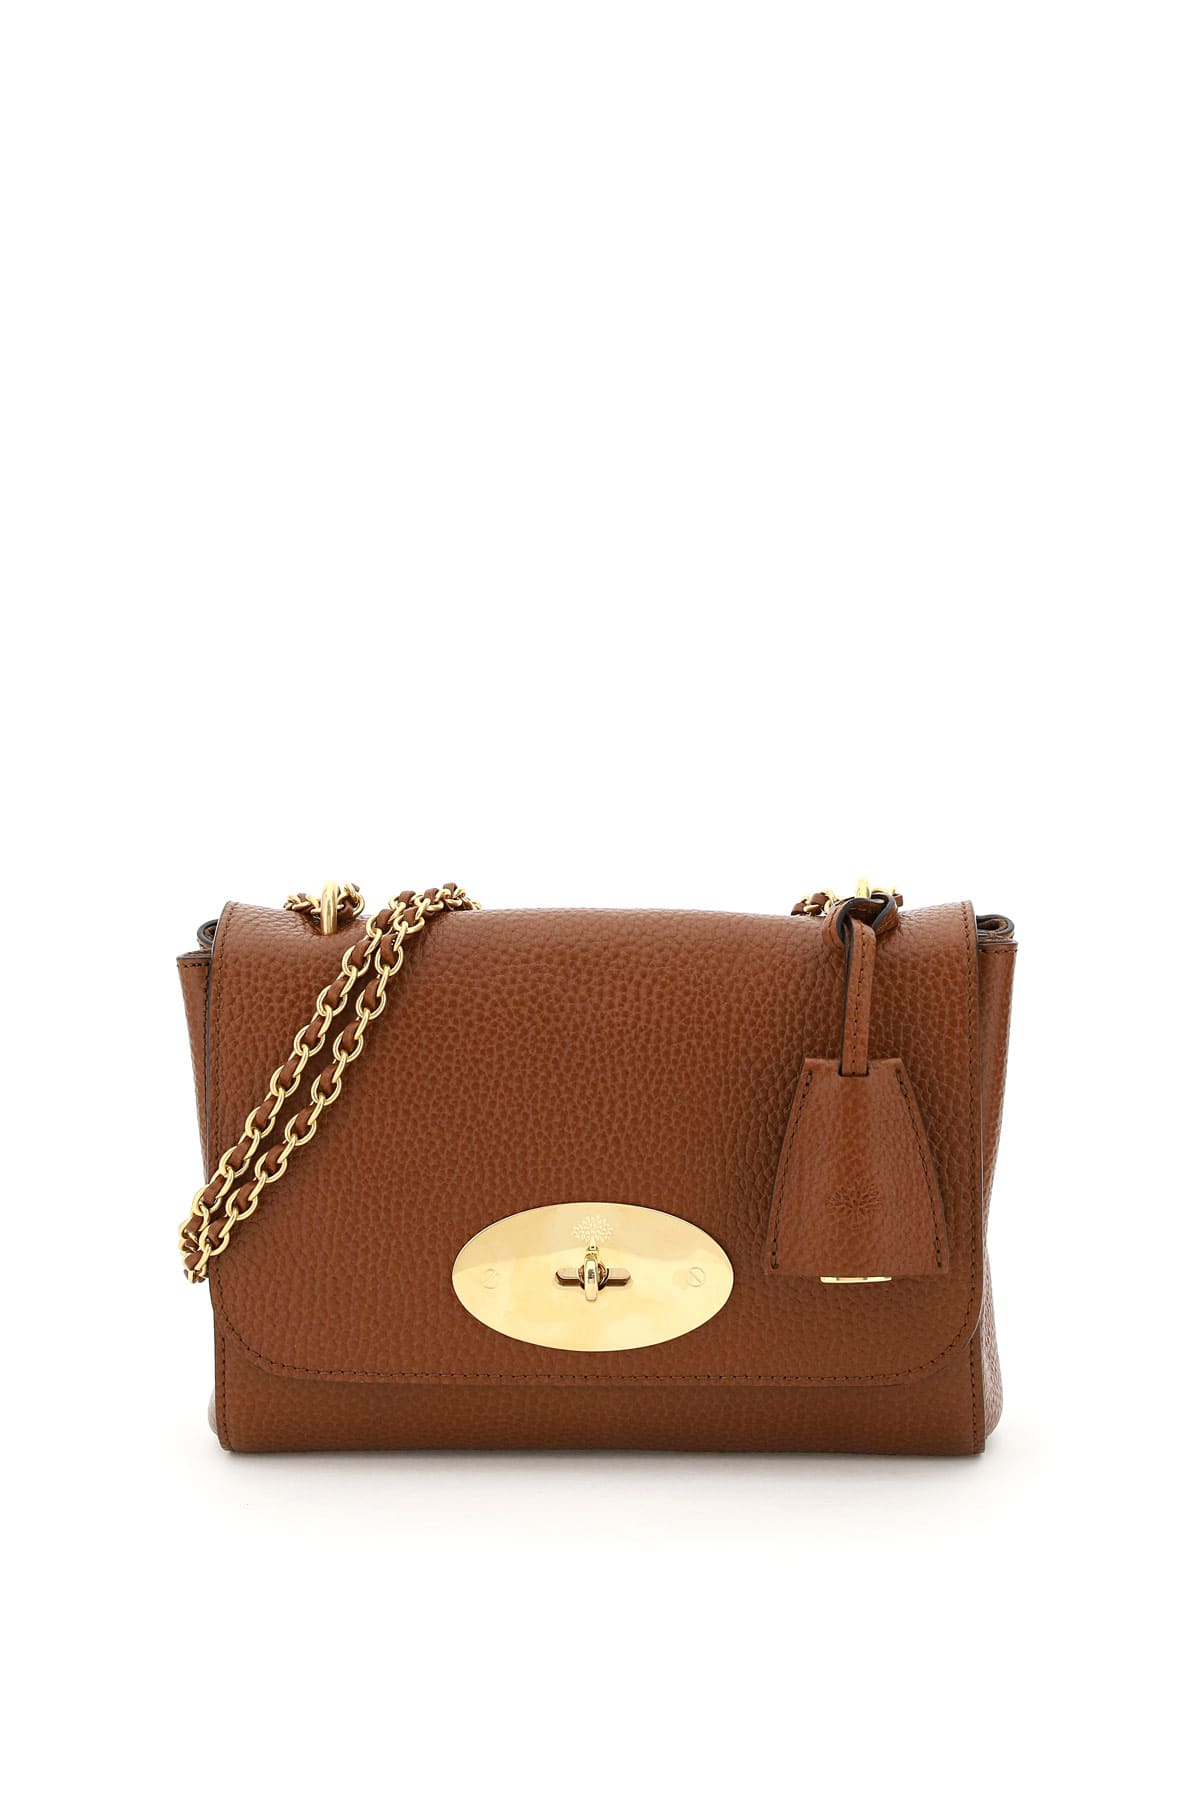 Mulberry SMALL LILY BAG